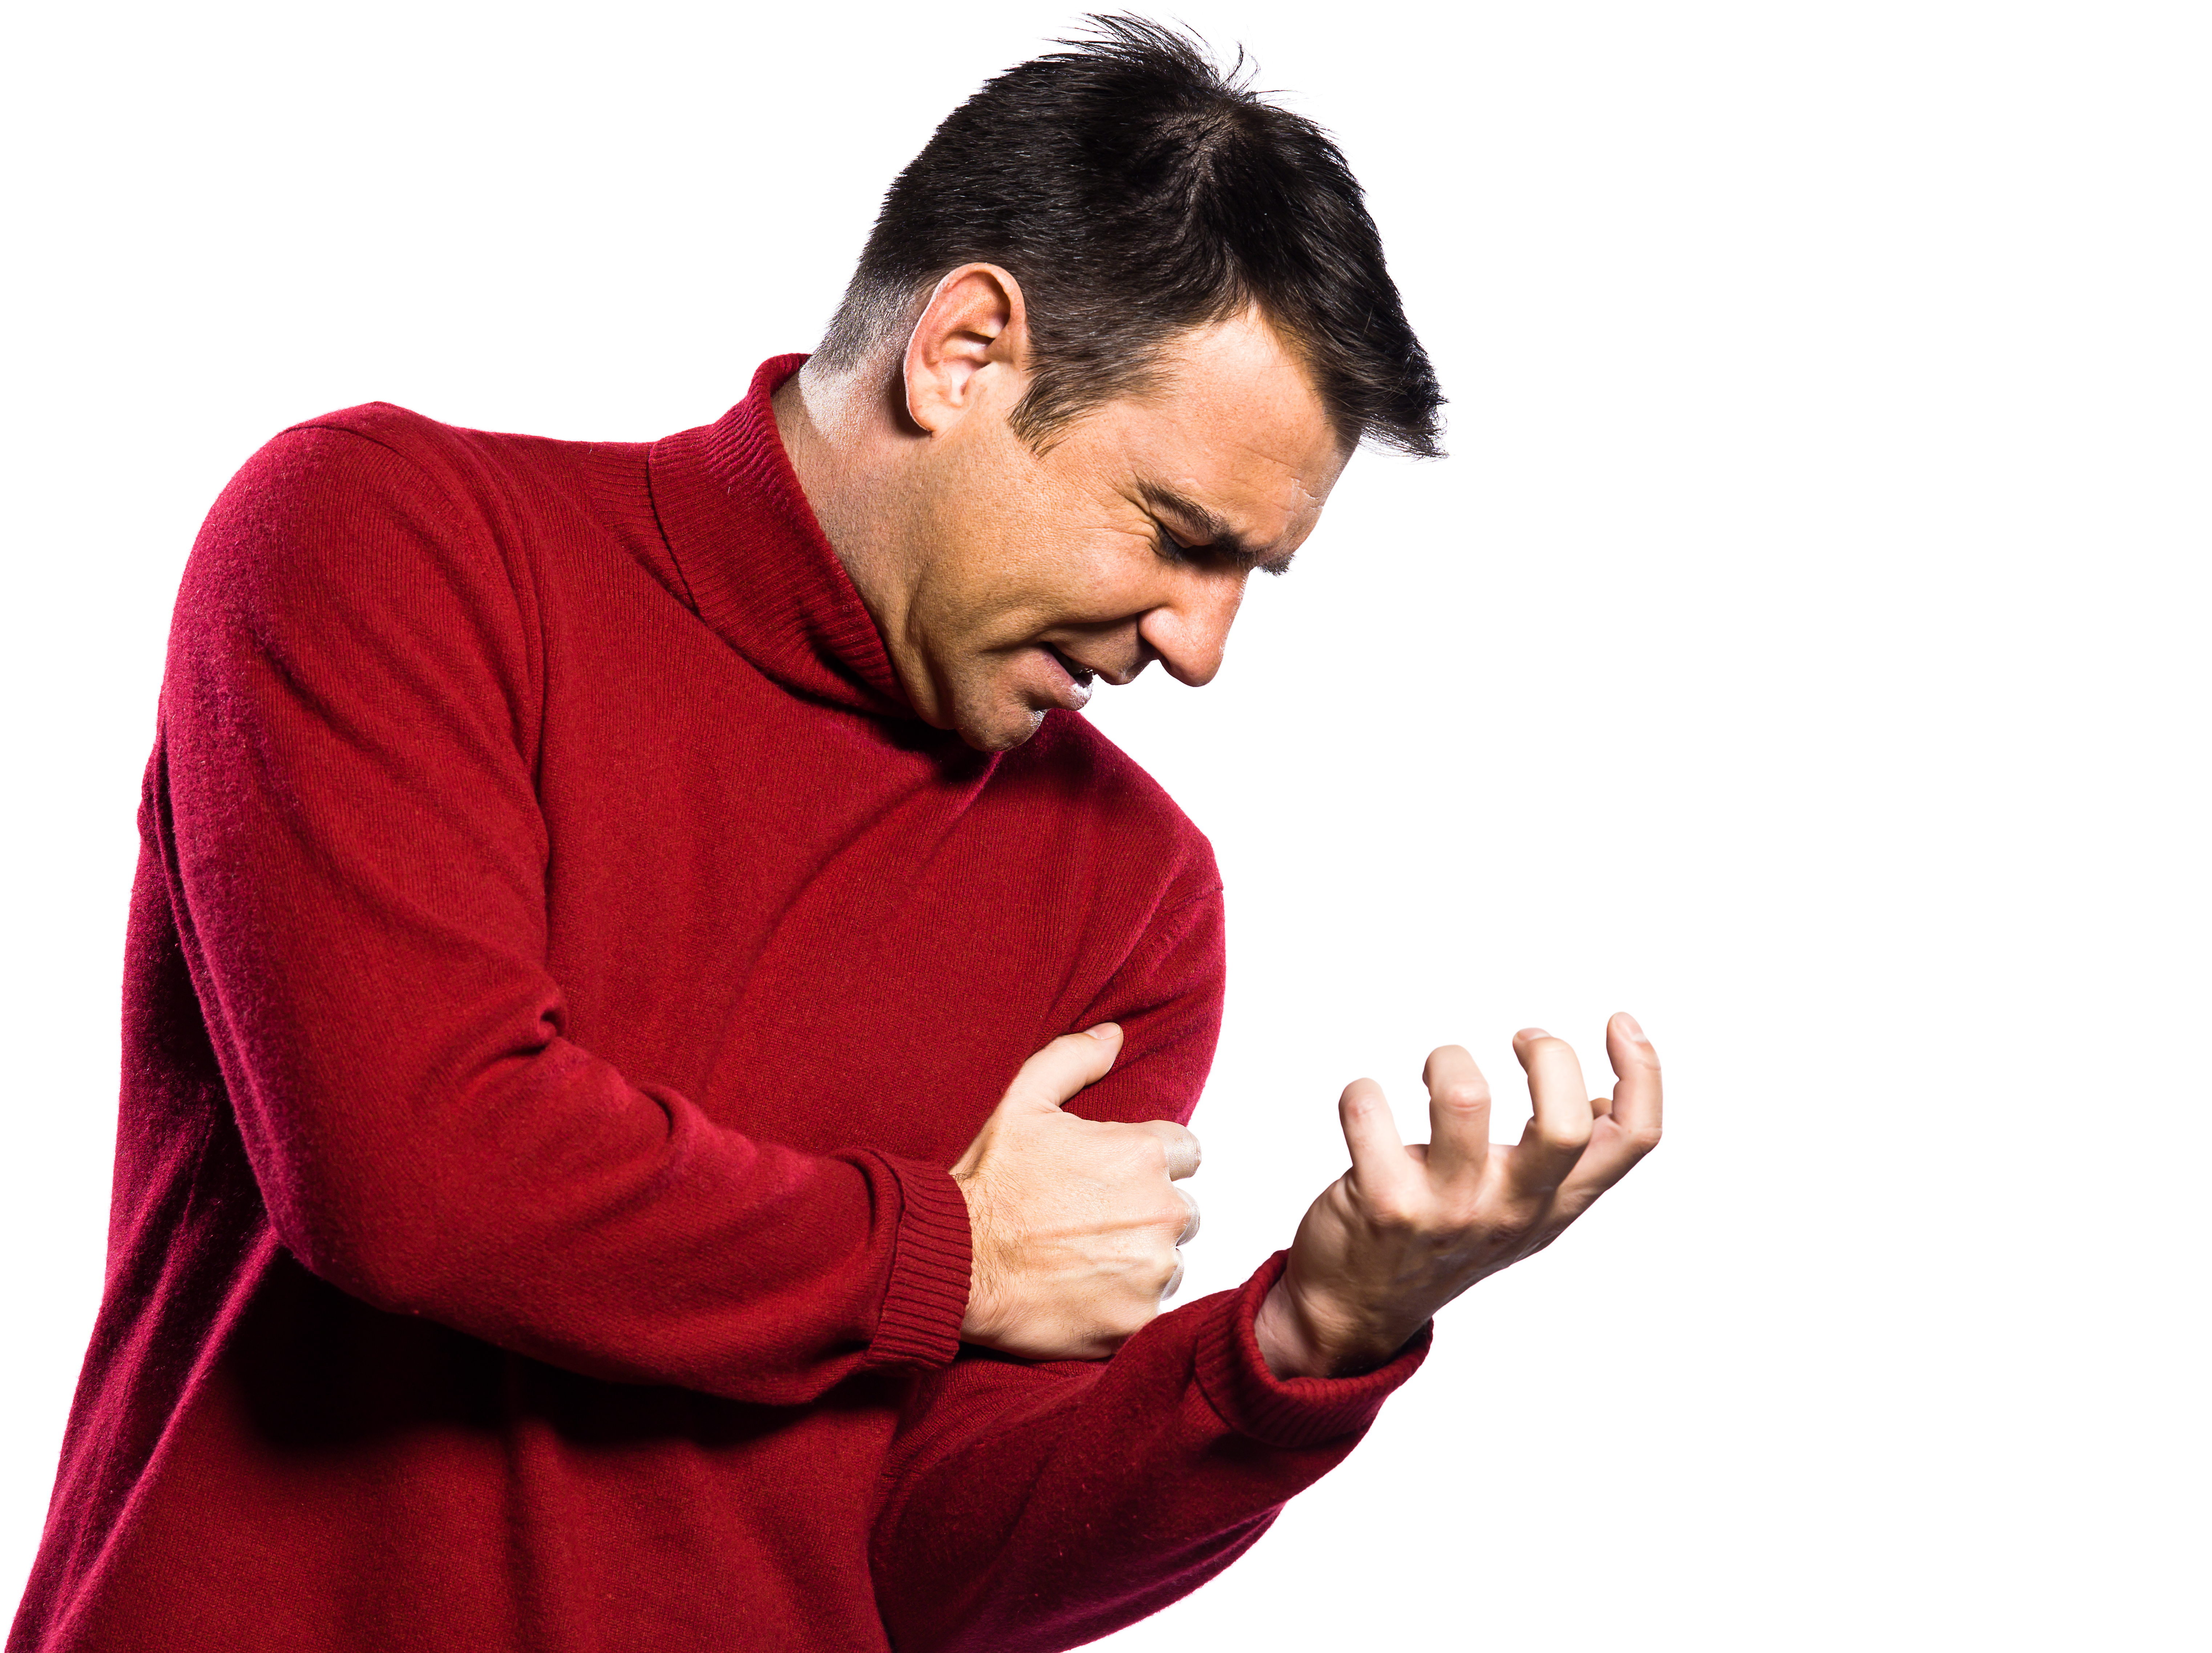 Pain in the Left Arm from Heart Attack vs. Muscle Problem